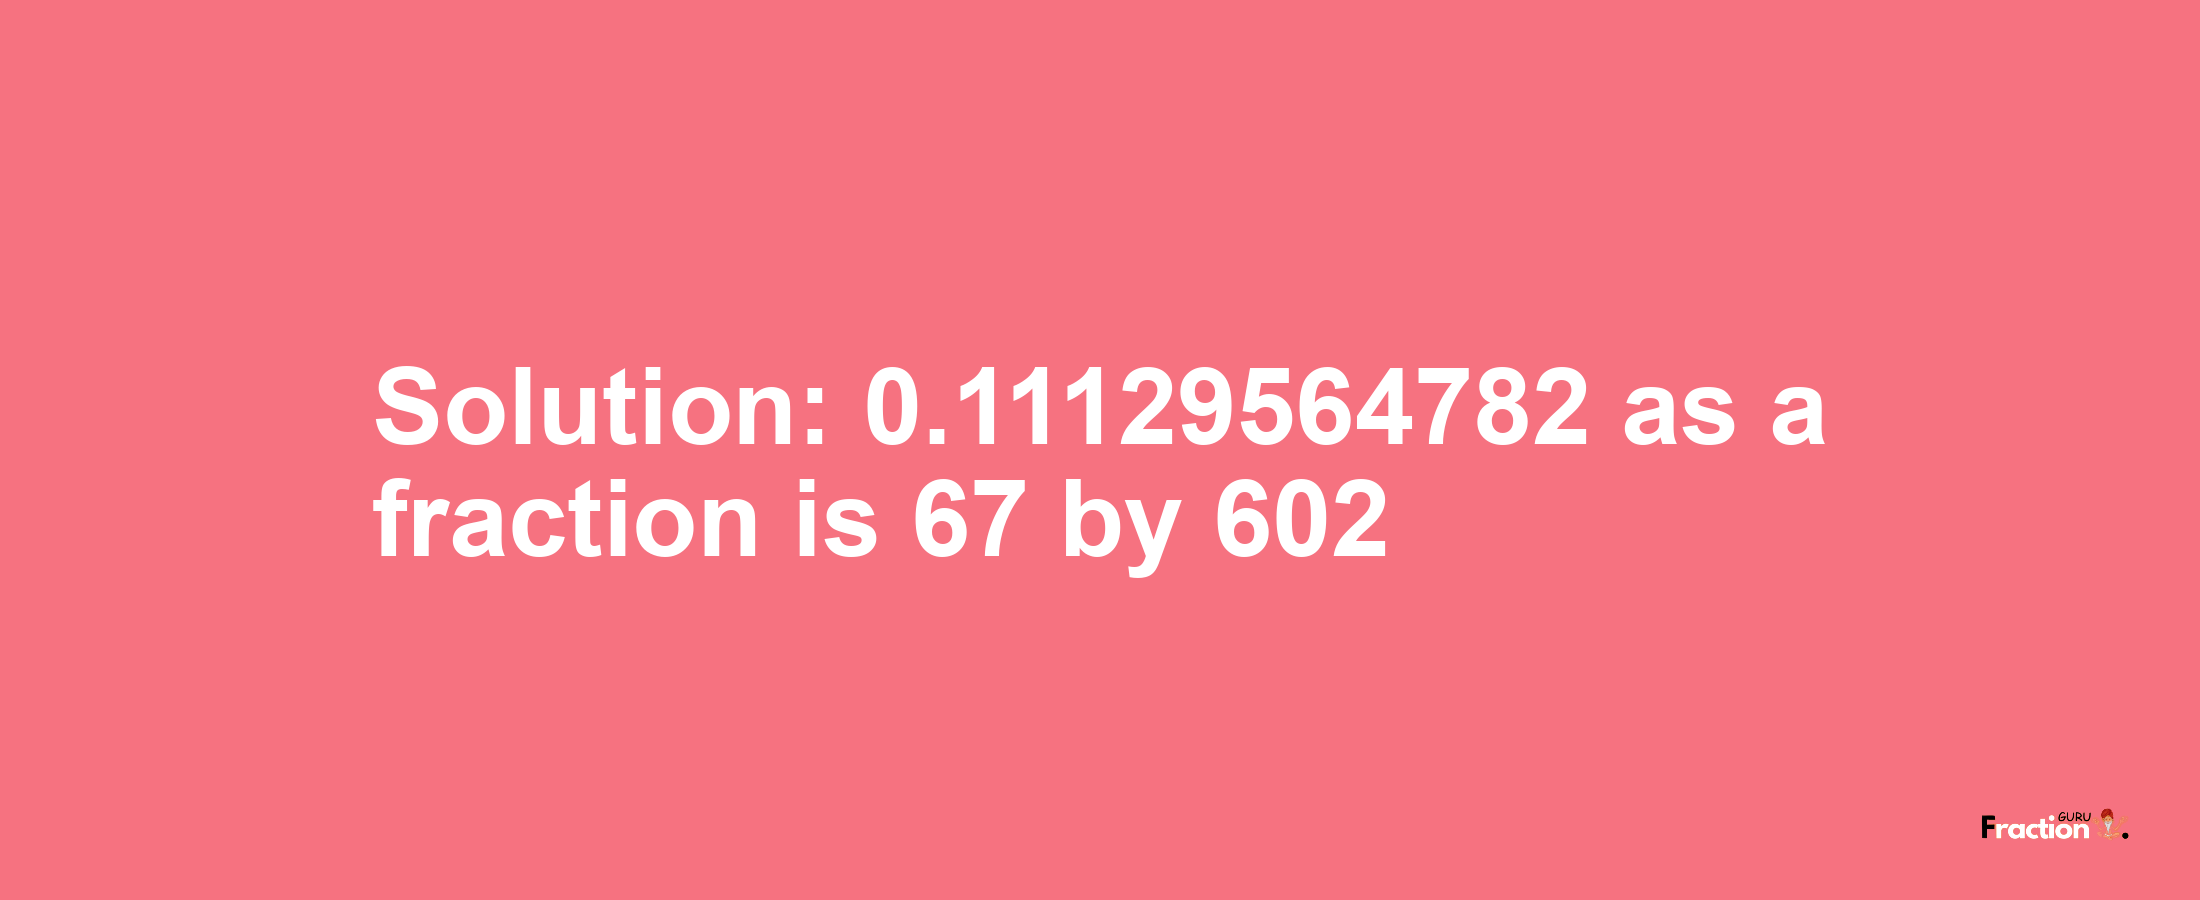 Solution:0.11129564782 as a fraction is 67/602